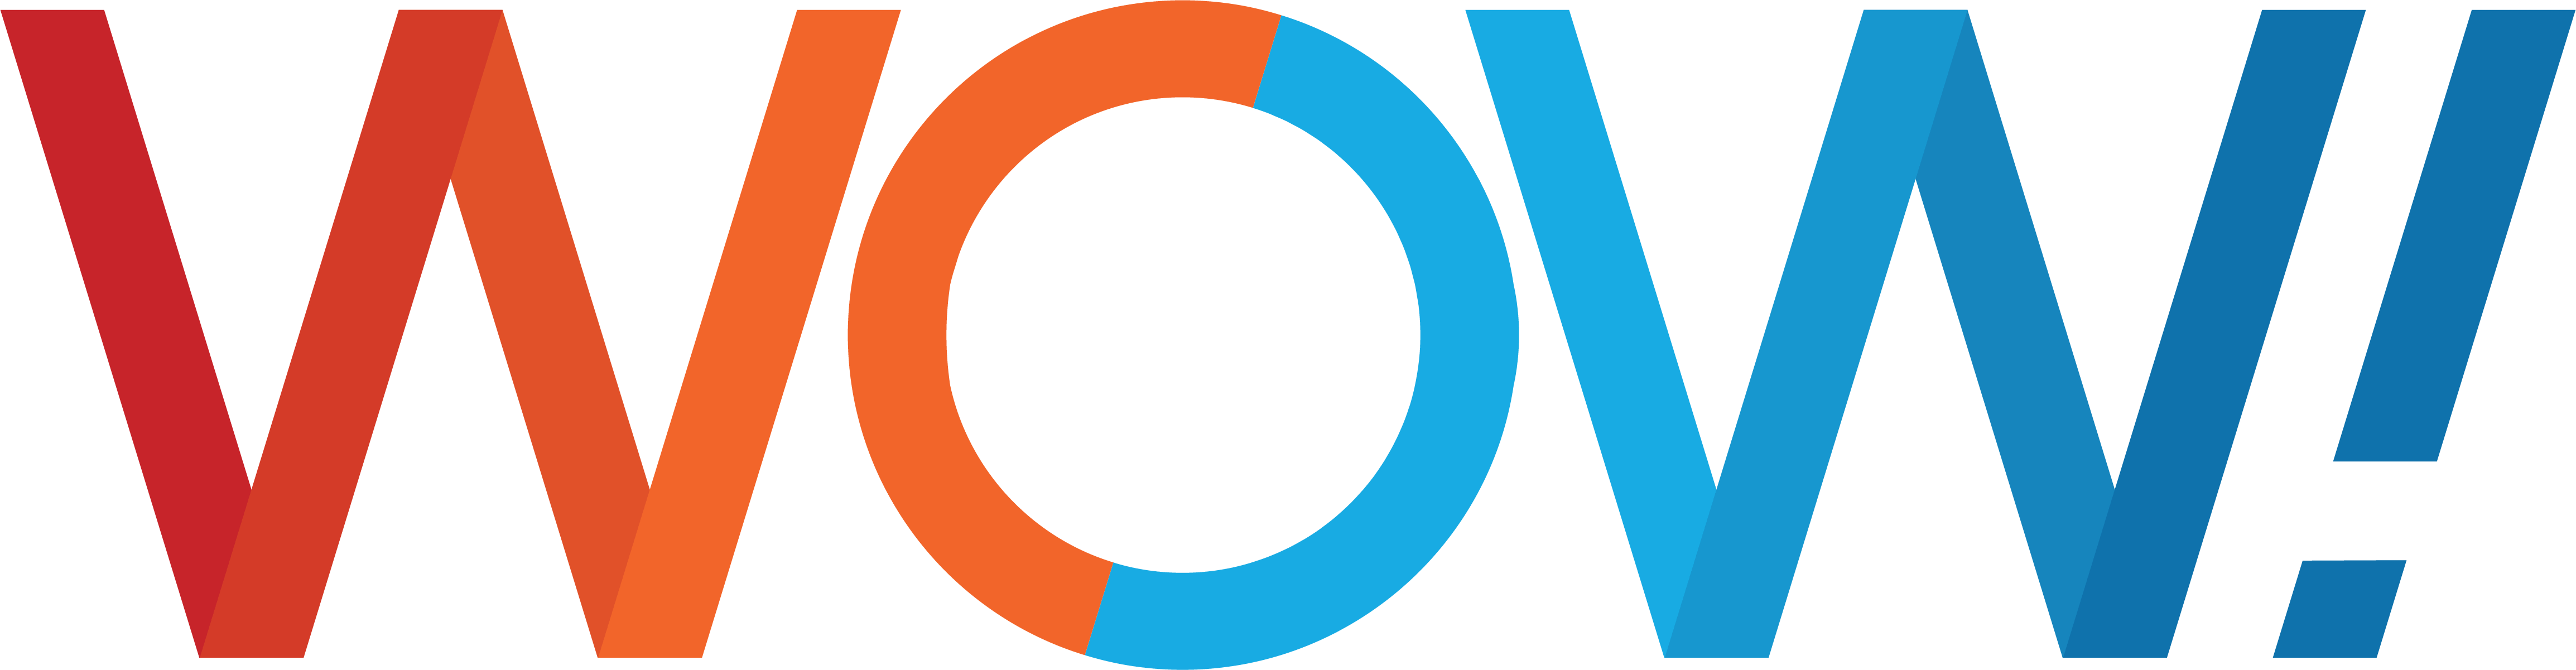 Wowway Logo - WOW! Internet Cable and Phone offers and support